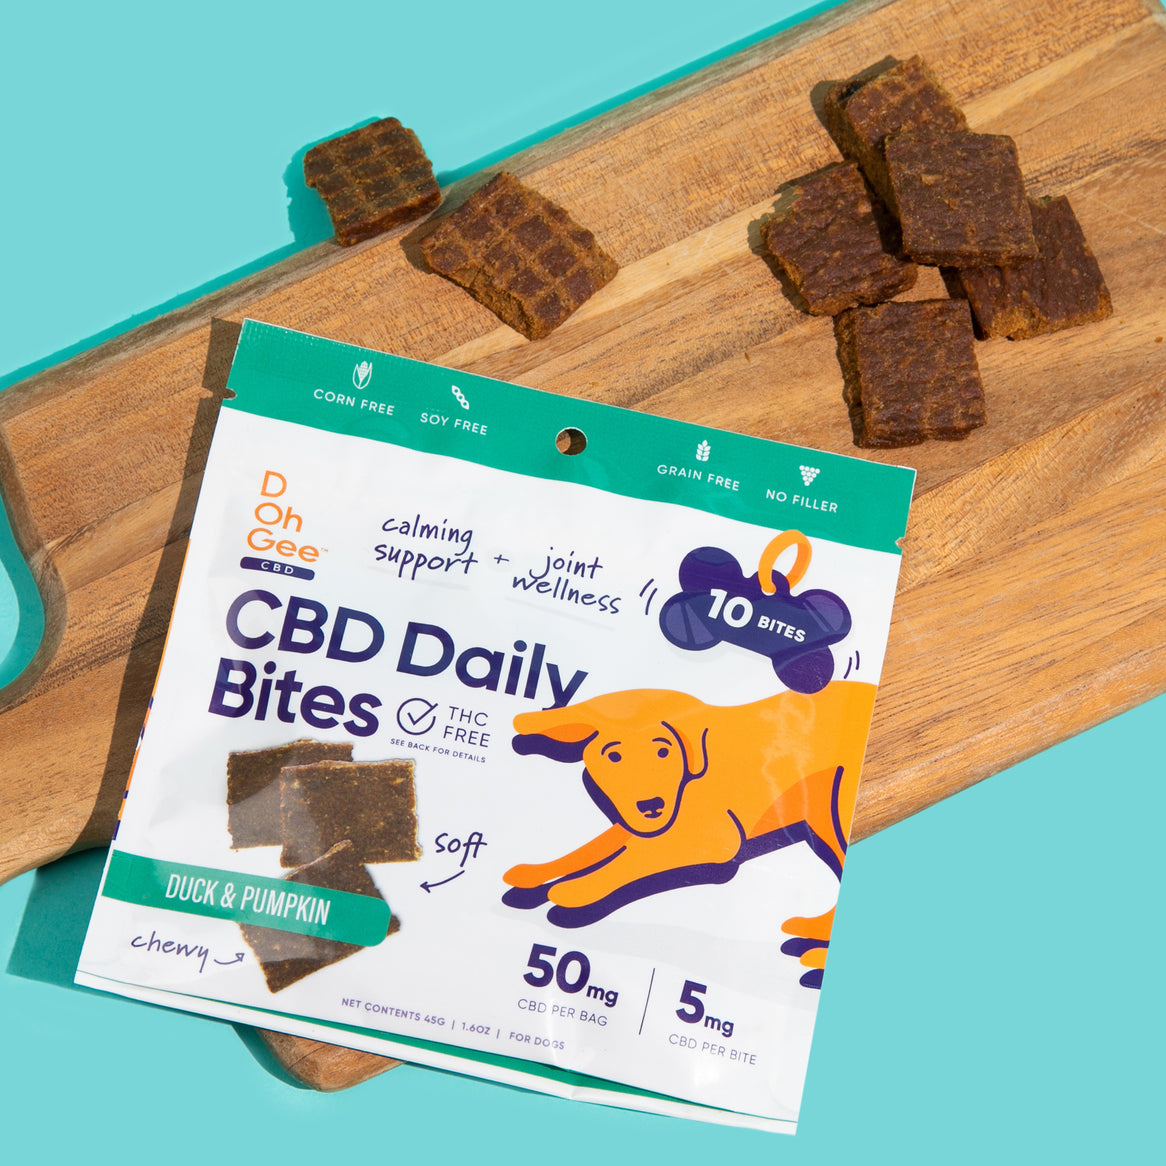 D Oh Gee CBD Oil and CBD Bites Bundle for Dogs